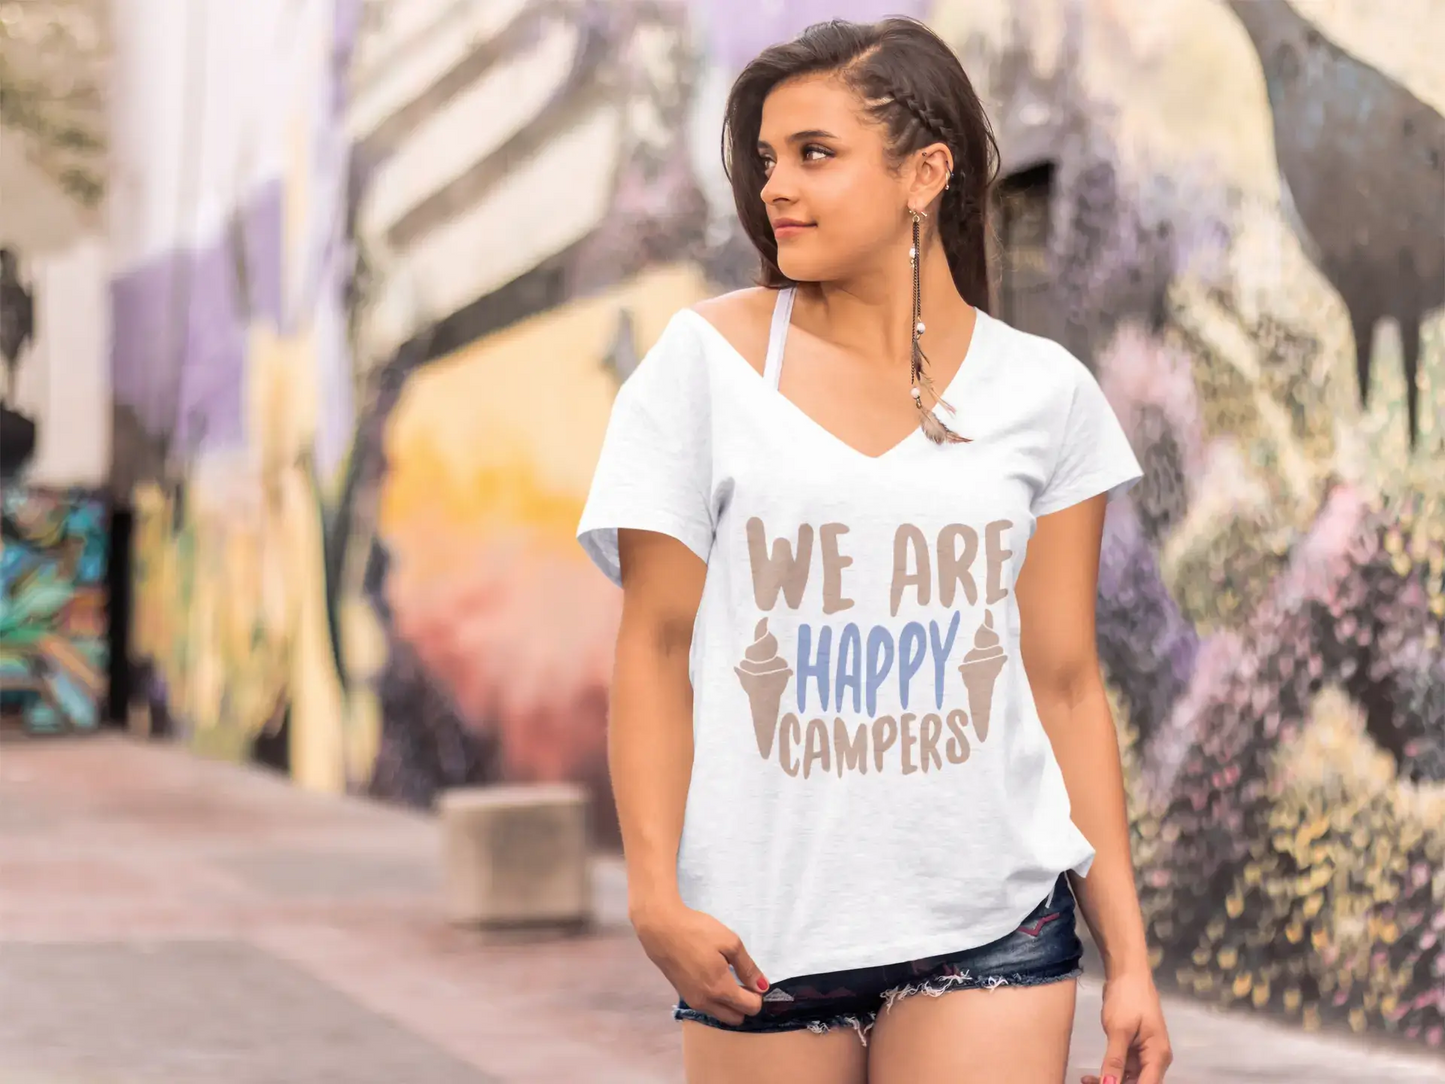 ULTRABASIC Women's T-Shirt We are Happy Campers - Short Sleeve Tee Shirt Tops